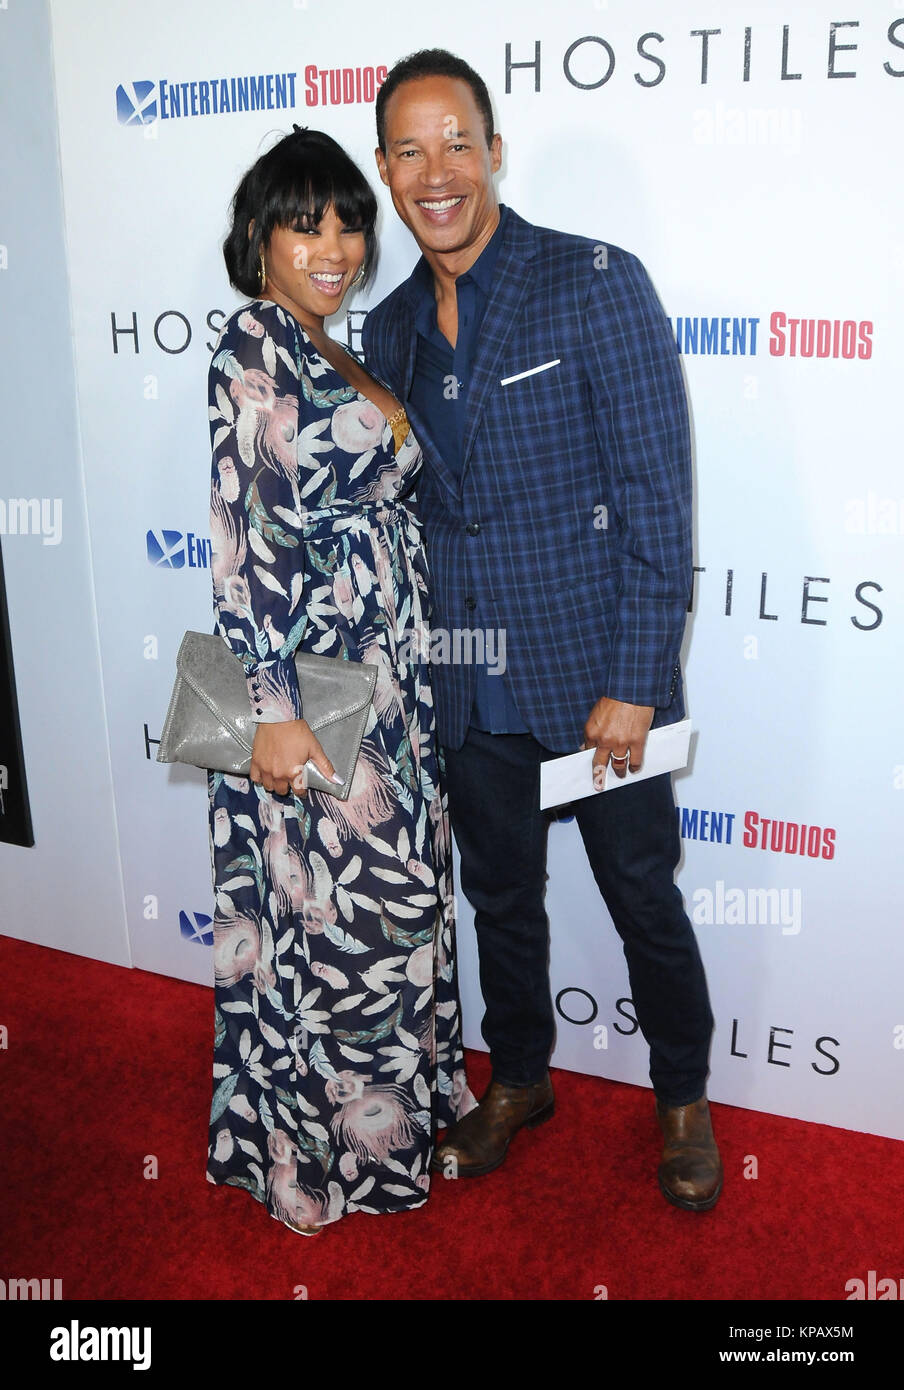 Beverly Hills, California, USA. 14th December, 2017. (L-R) Actress Milan Kelley and producer Jon Kelley attend the Los Angeles premiere of Entertainment Studios Motion Pictures' 'Hostiles' at Samuel Goldwyn Theater on December 14, 2017 in Beverly Hills, California. Photo by Barry King/Alamy Live News Stock Photo